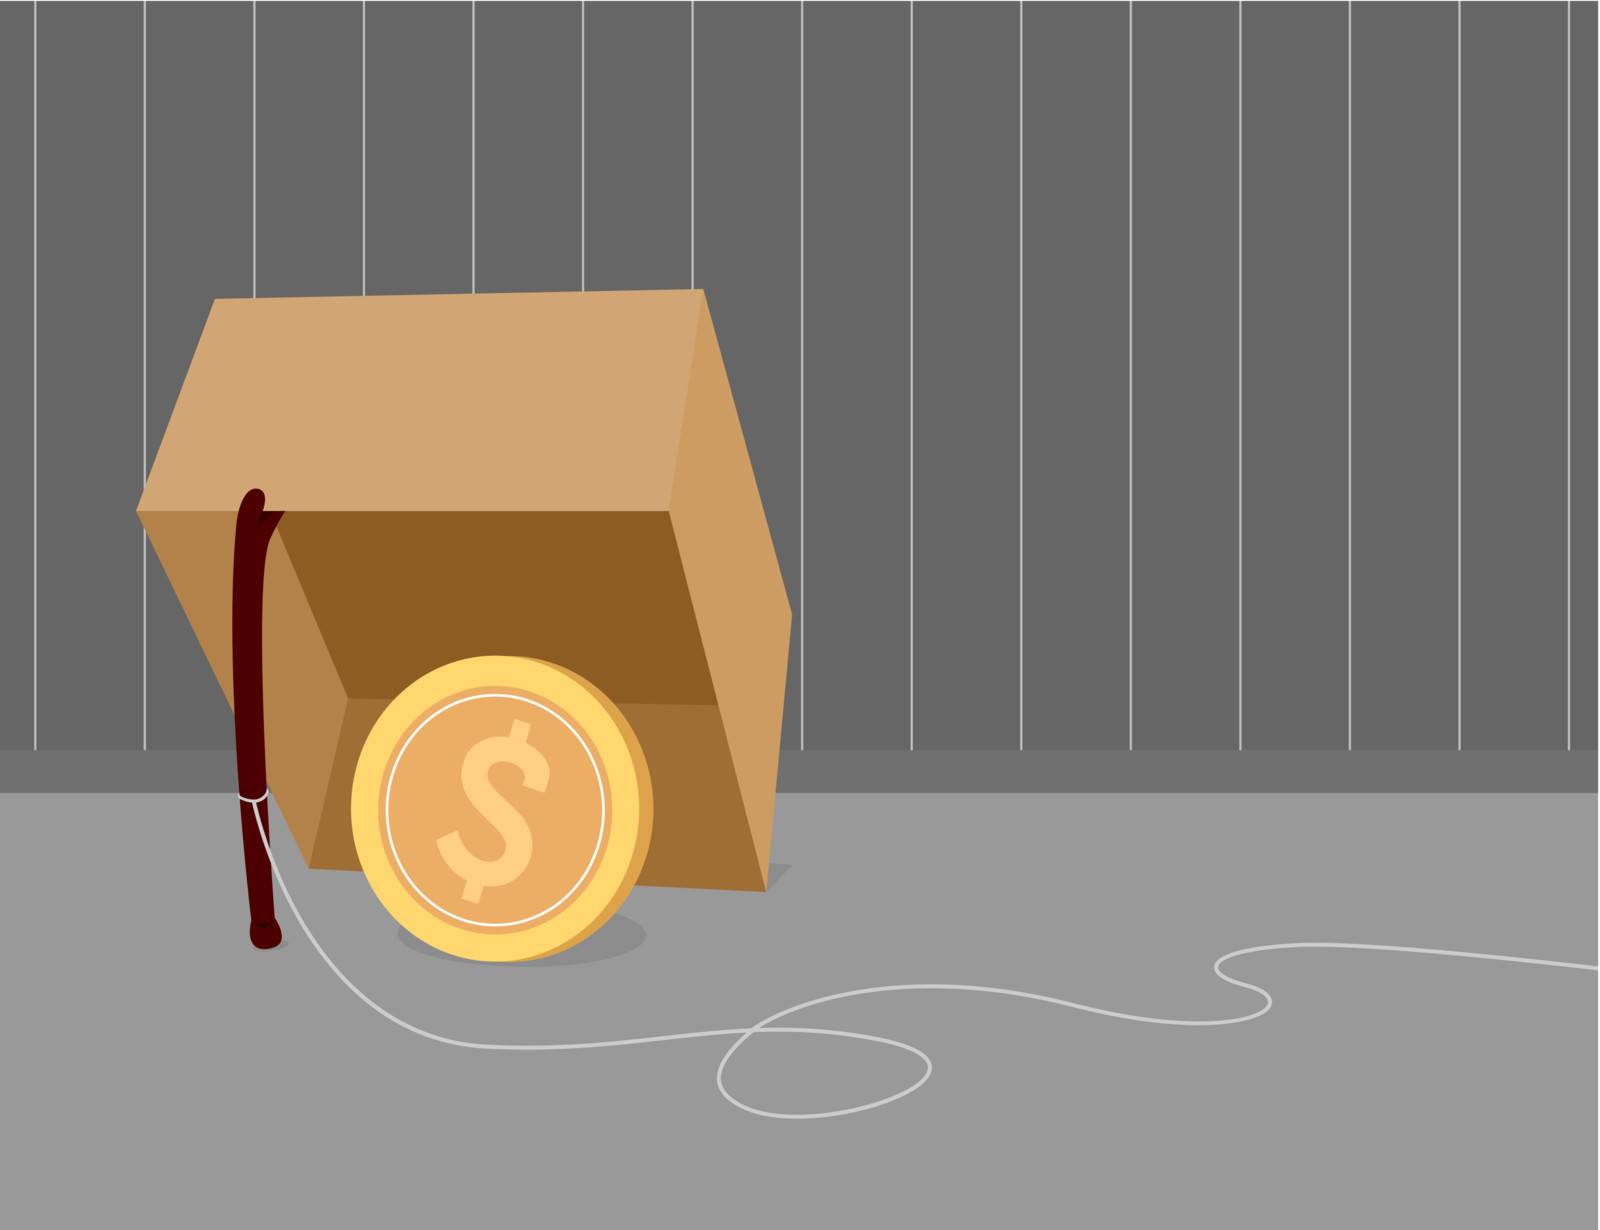 Money trap using coin as bait by curvabezier